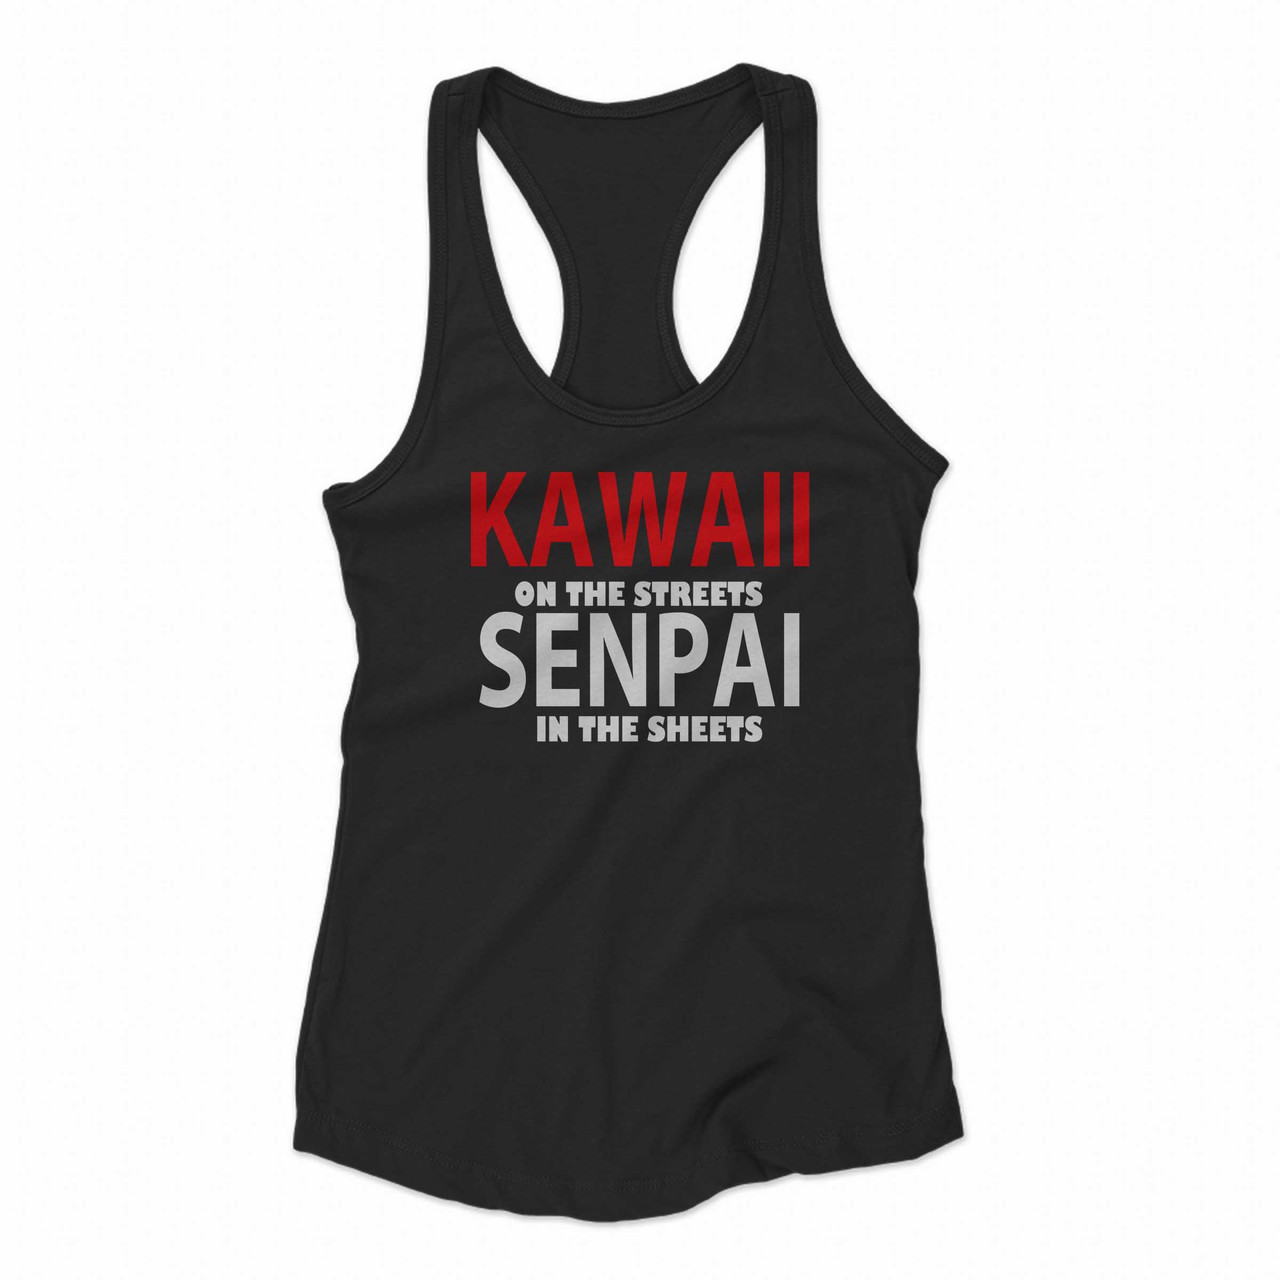 abbie ott recommends kawaii in the streets senpai in the sheets pic